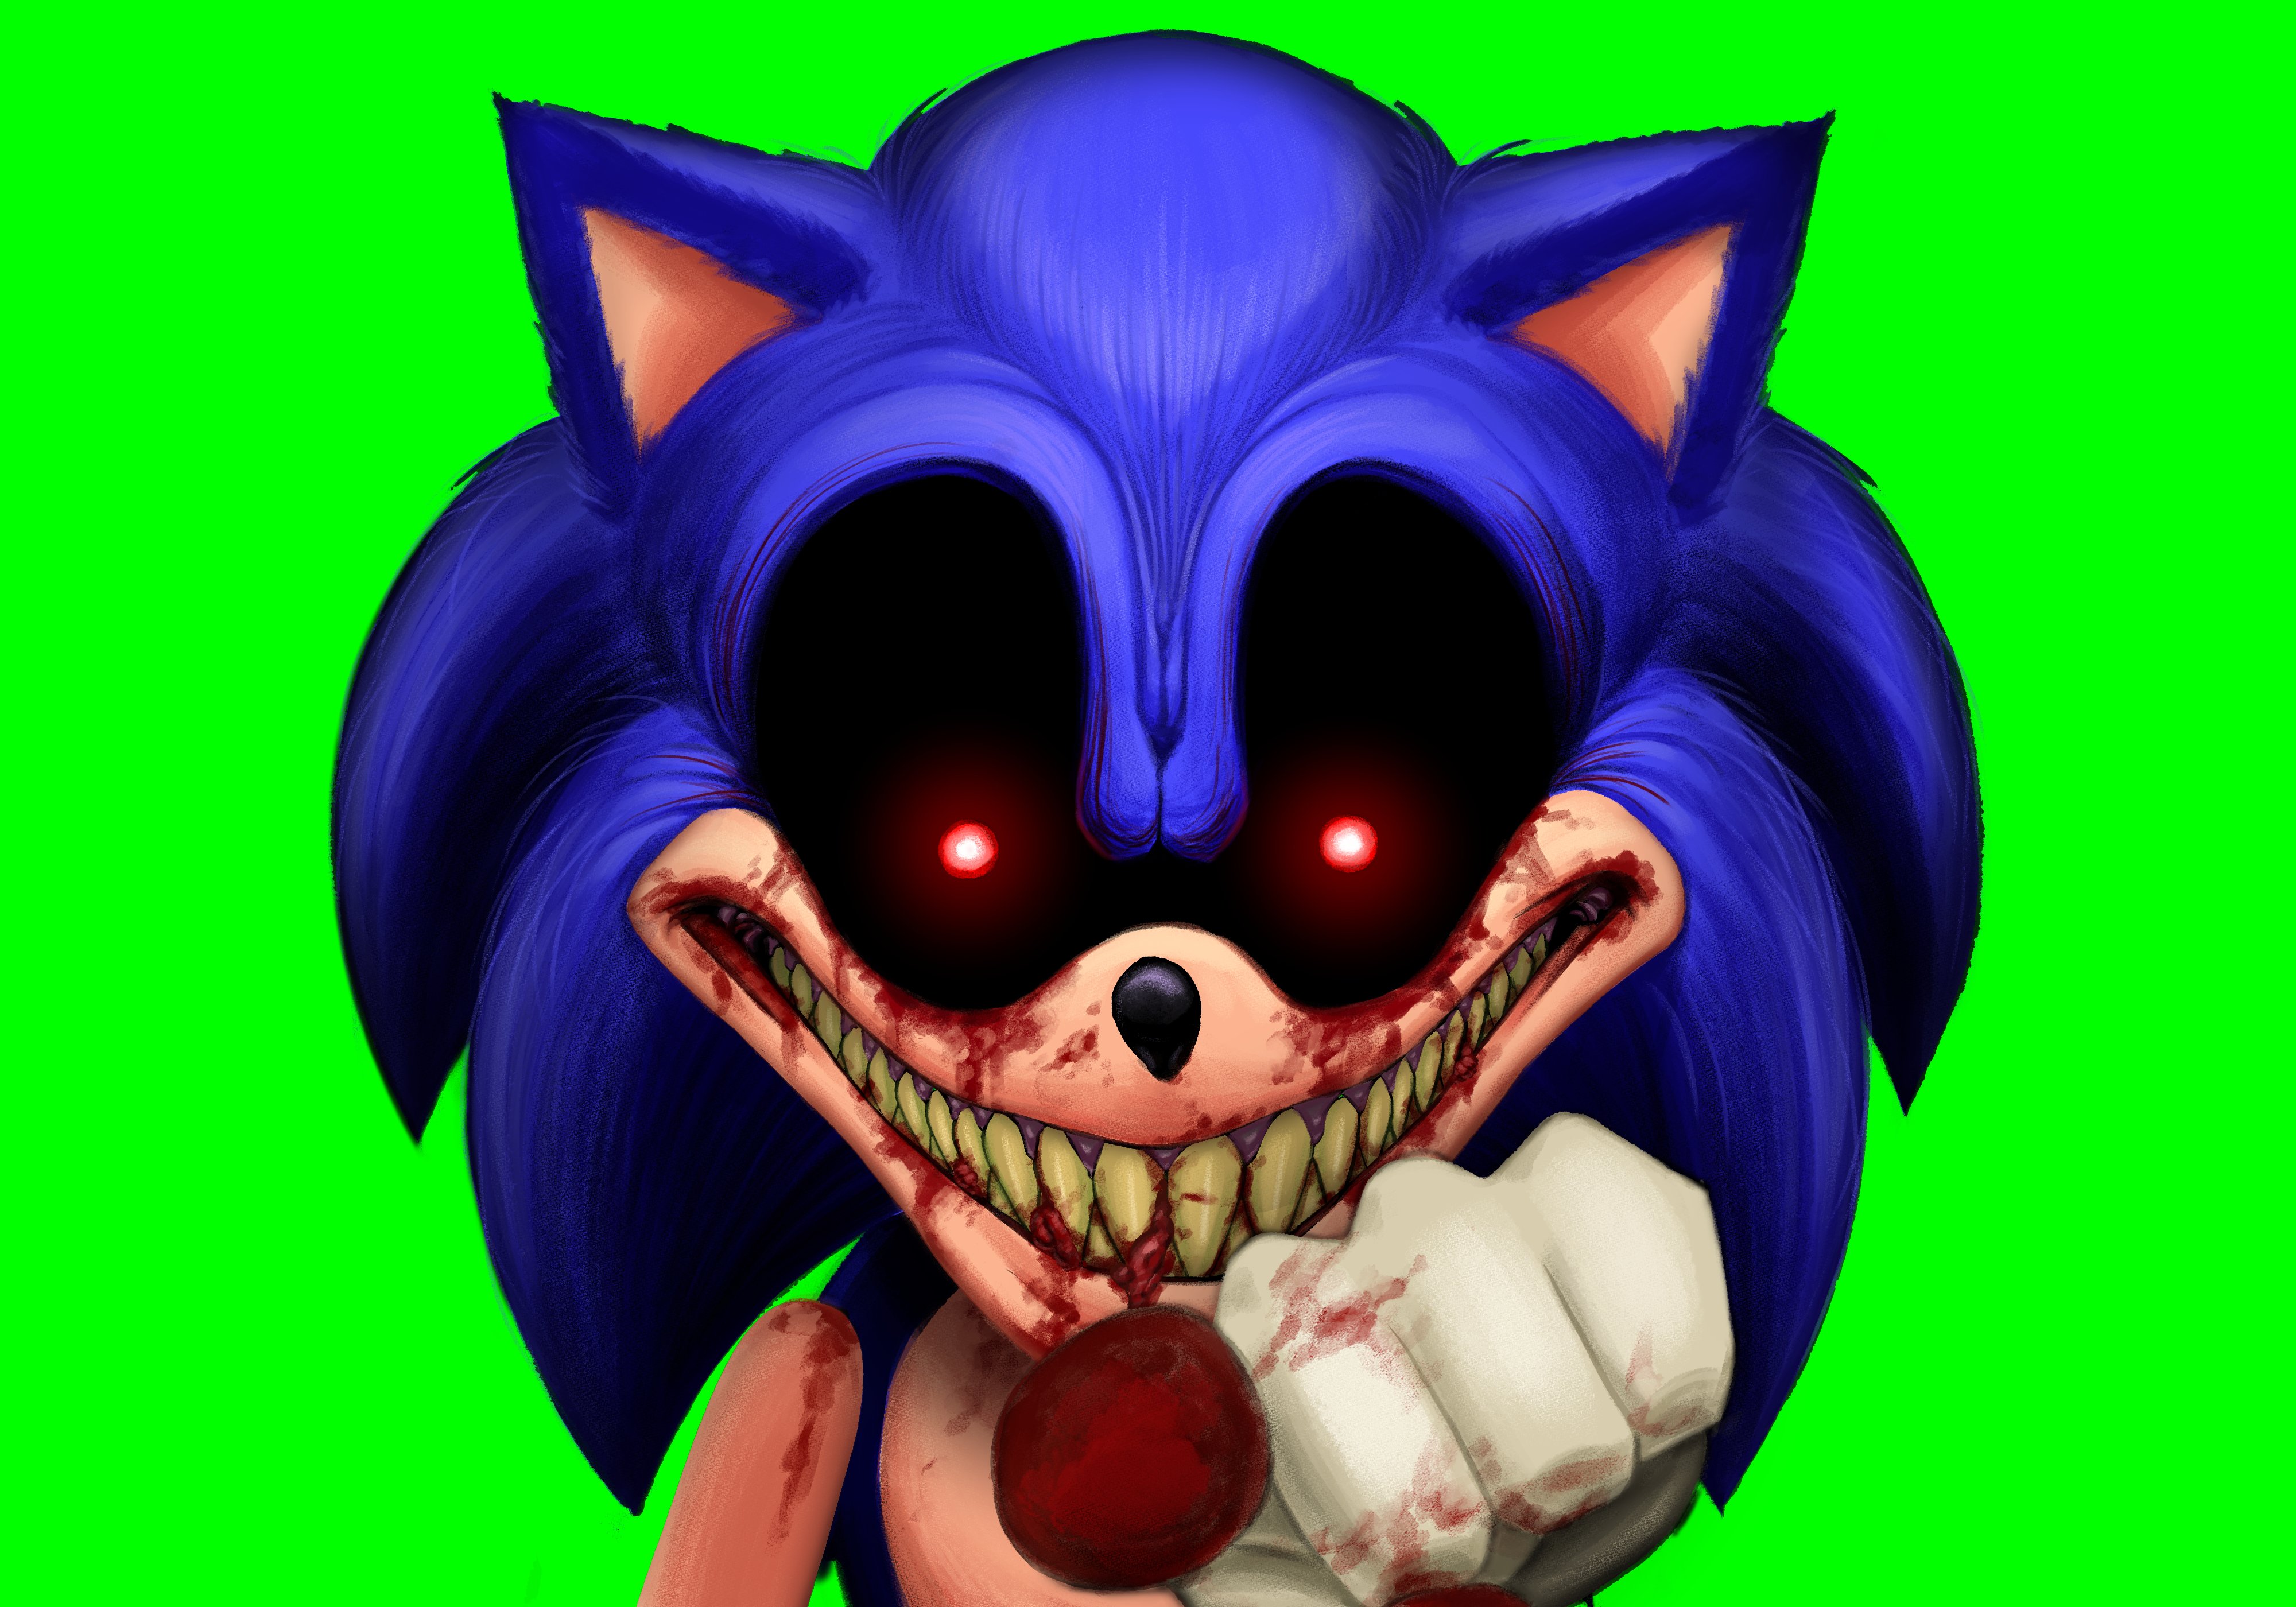 Sonic.exe by Suirano on Newgrounds